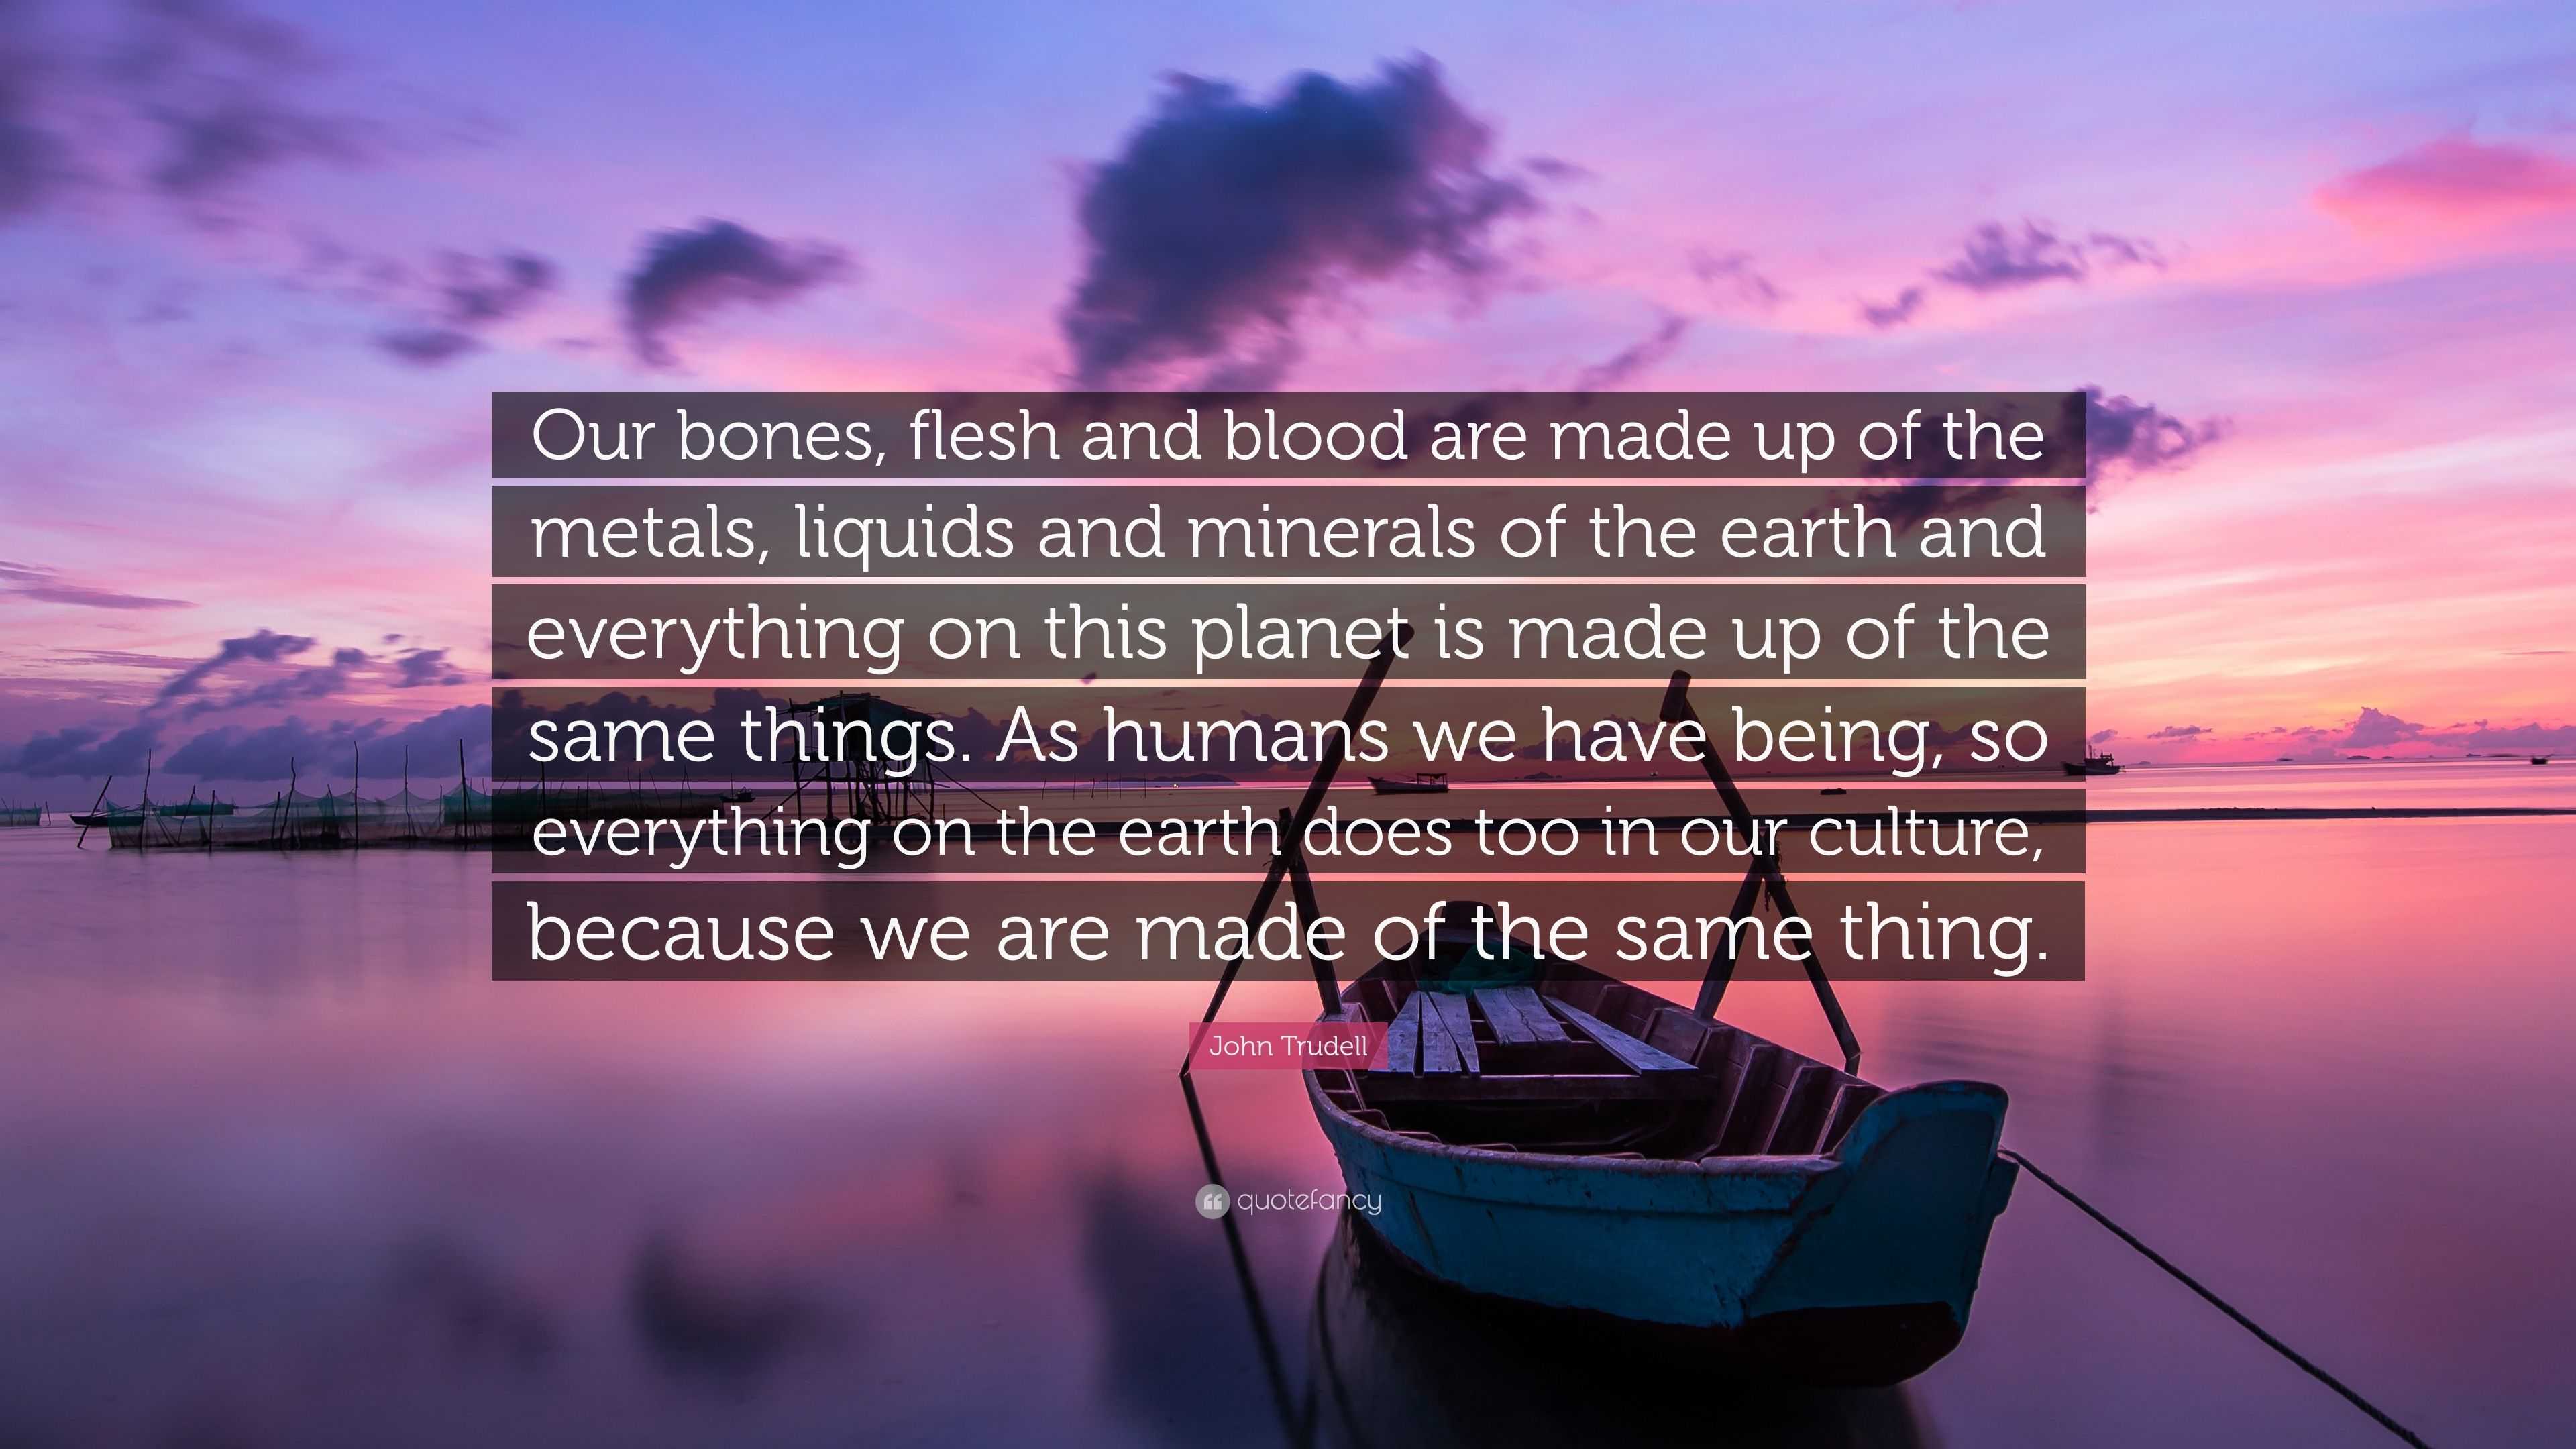 John Trudell Quote Our Bones Flesh And Blood Are Made Up Of The Metals Liquids And Minerals Of The Earth And Everything On This Planet Is 7 Wallpapers Quotefancy